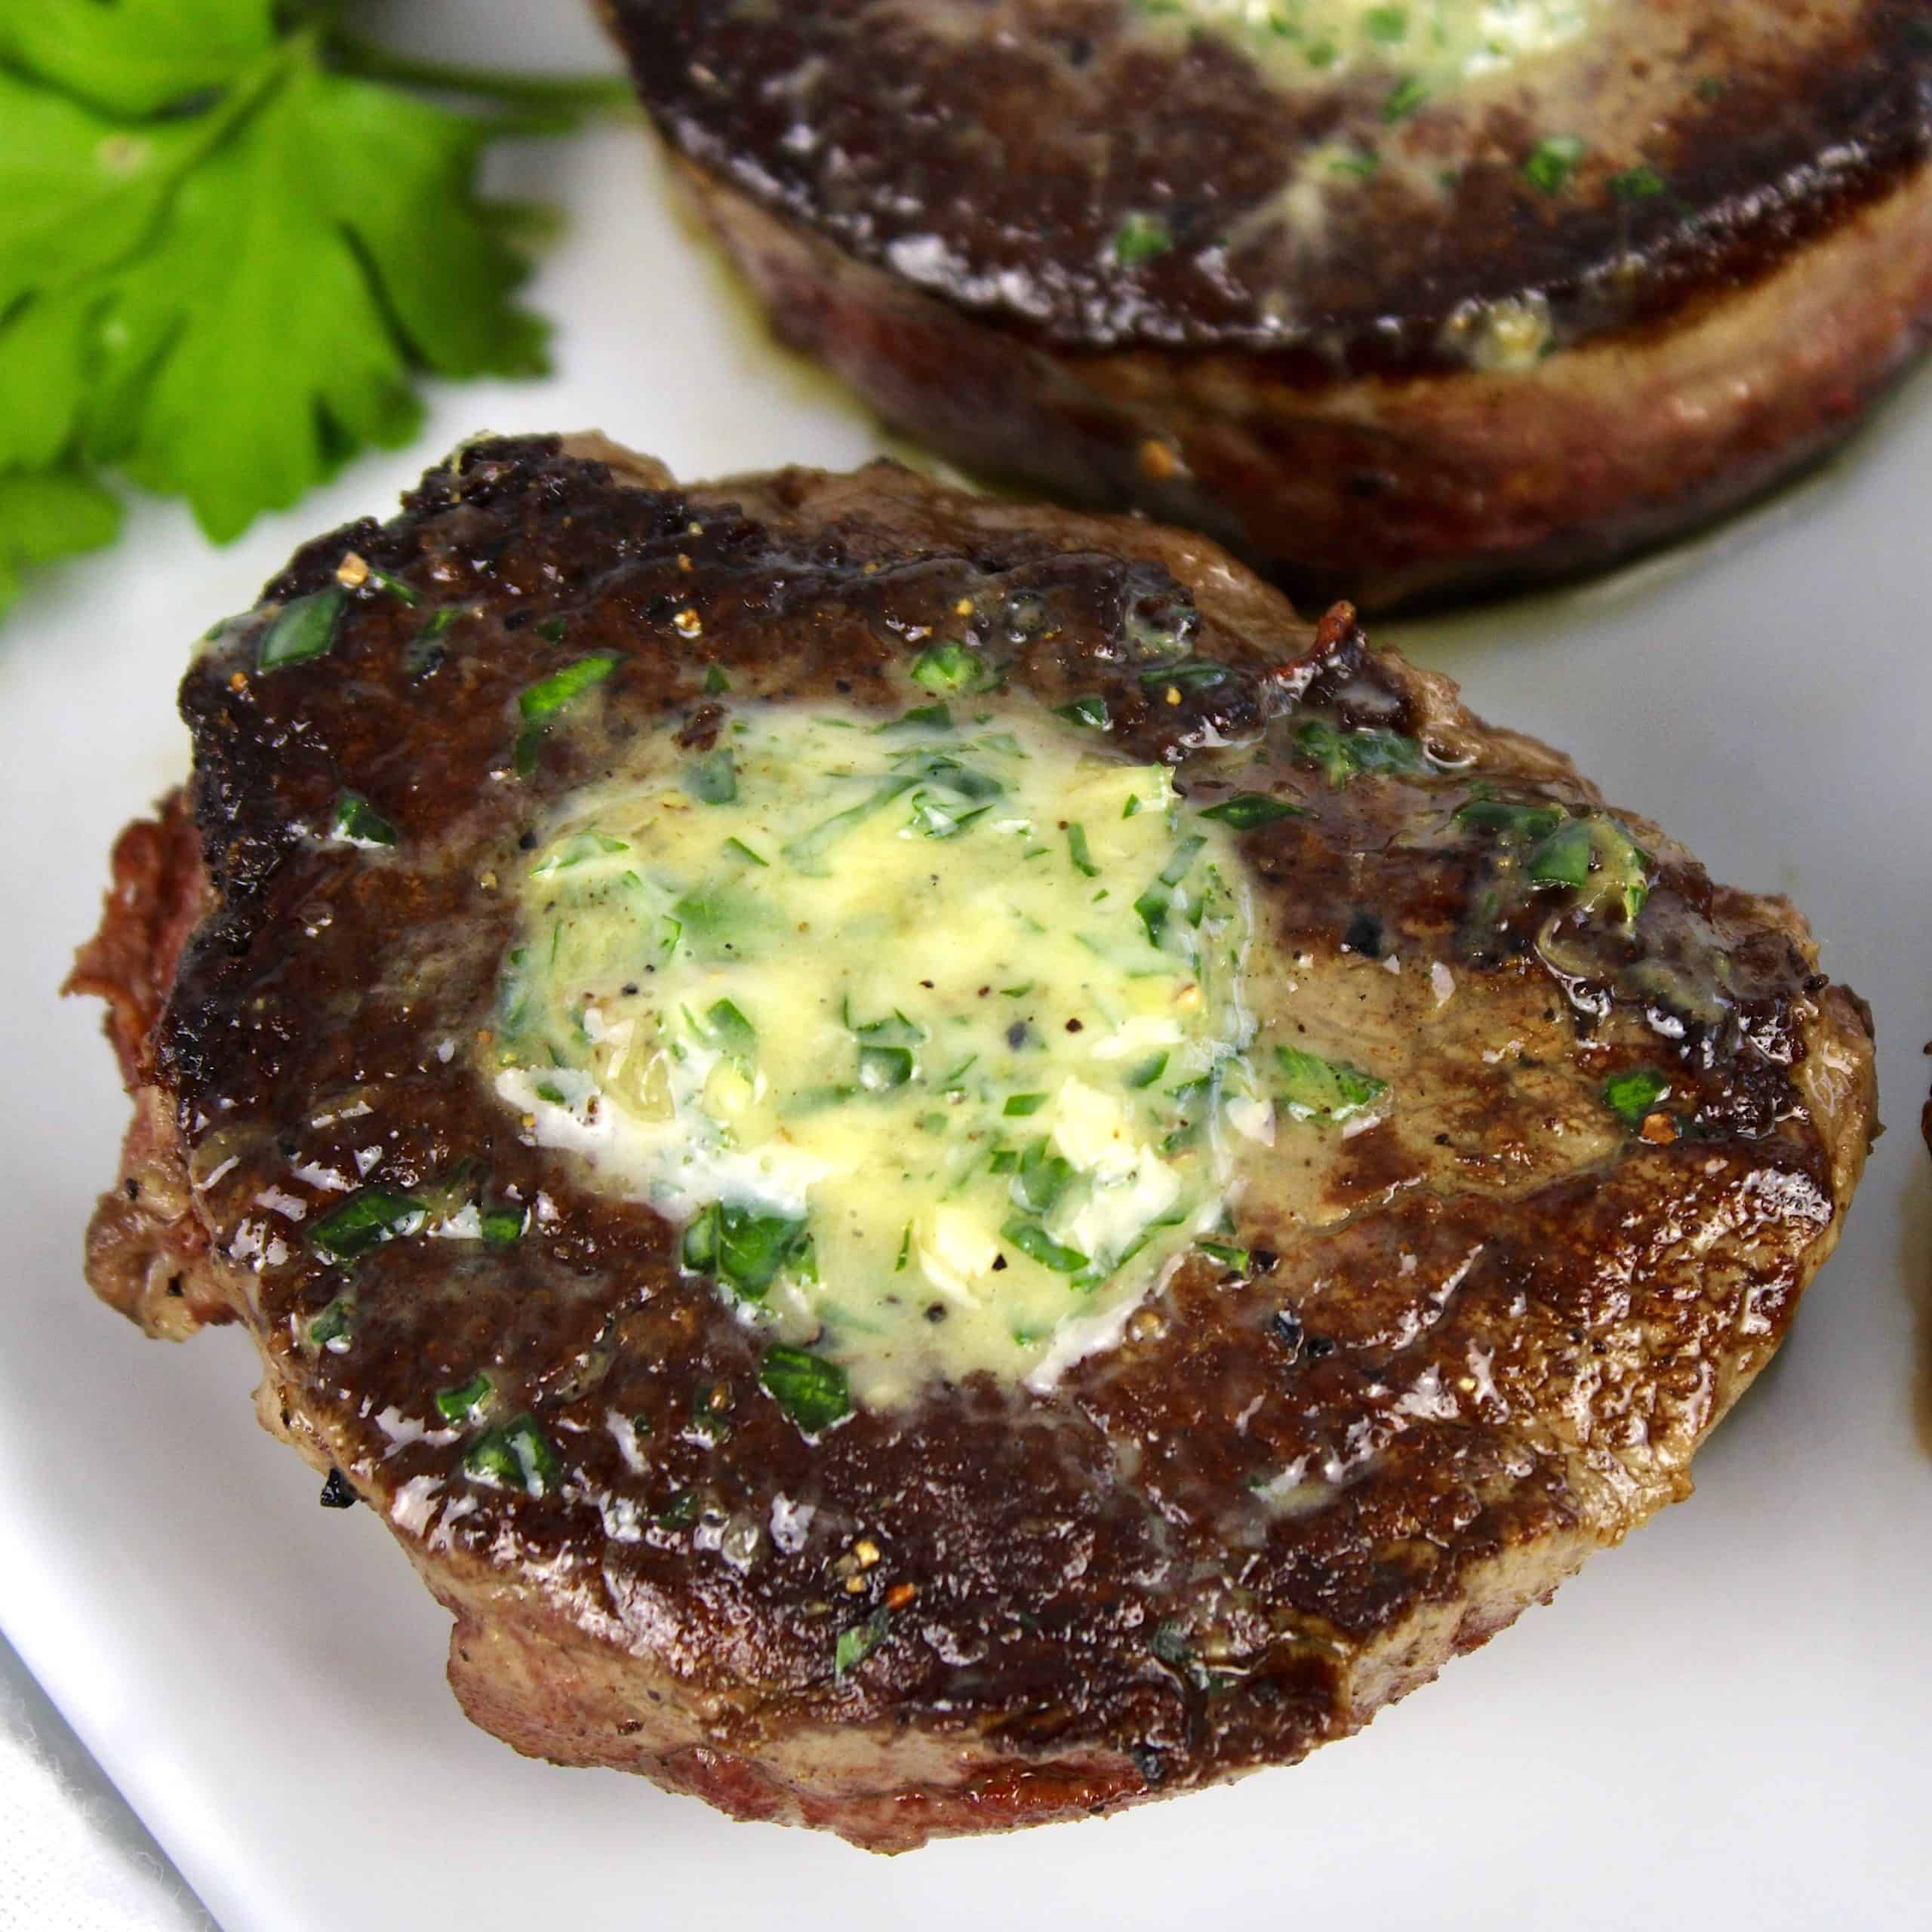 https://ketocookingchristian.com/wp-content/uploads/2021/09/Pan-Seared-Filet-Mignon9-scaled.jpeg